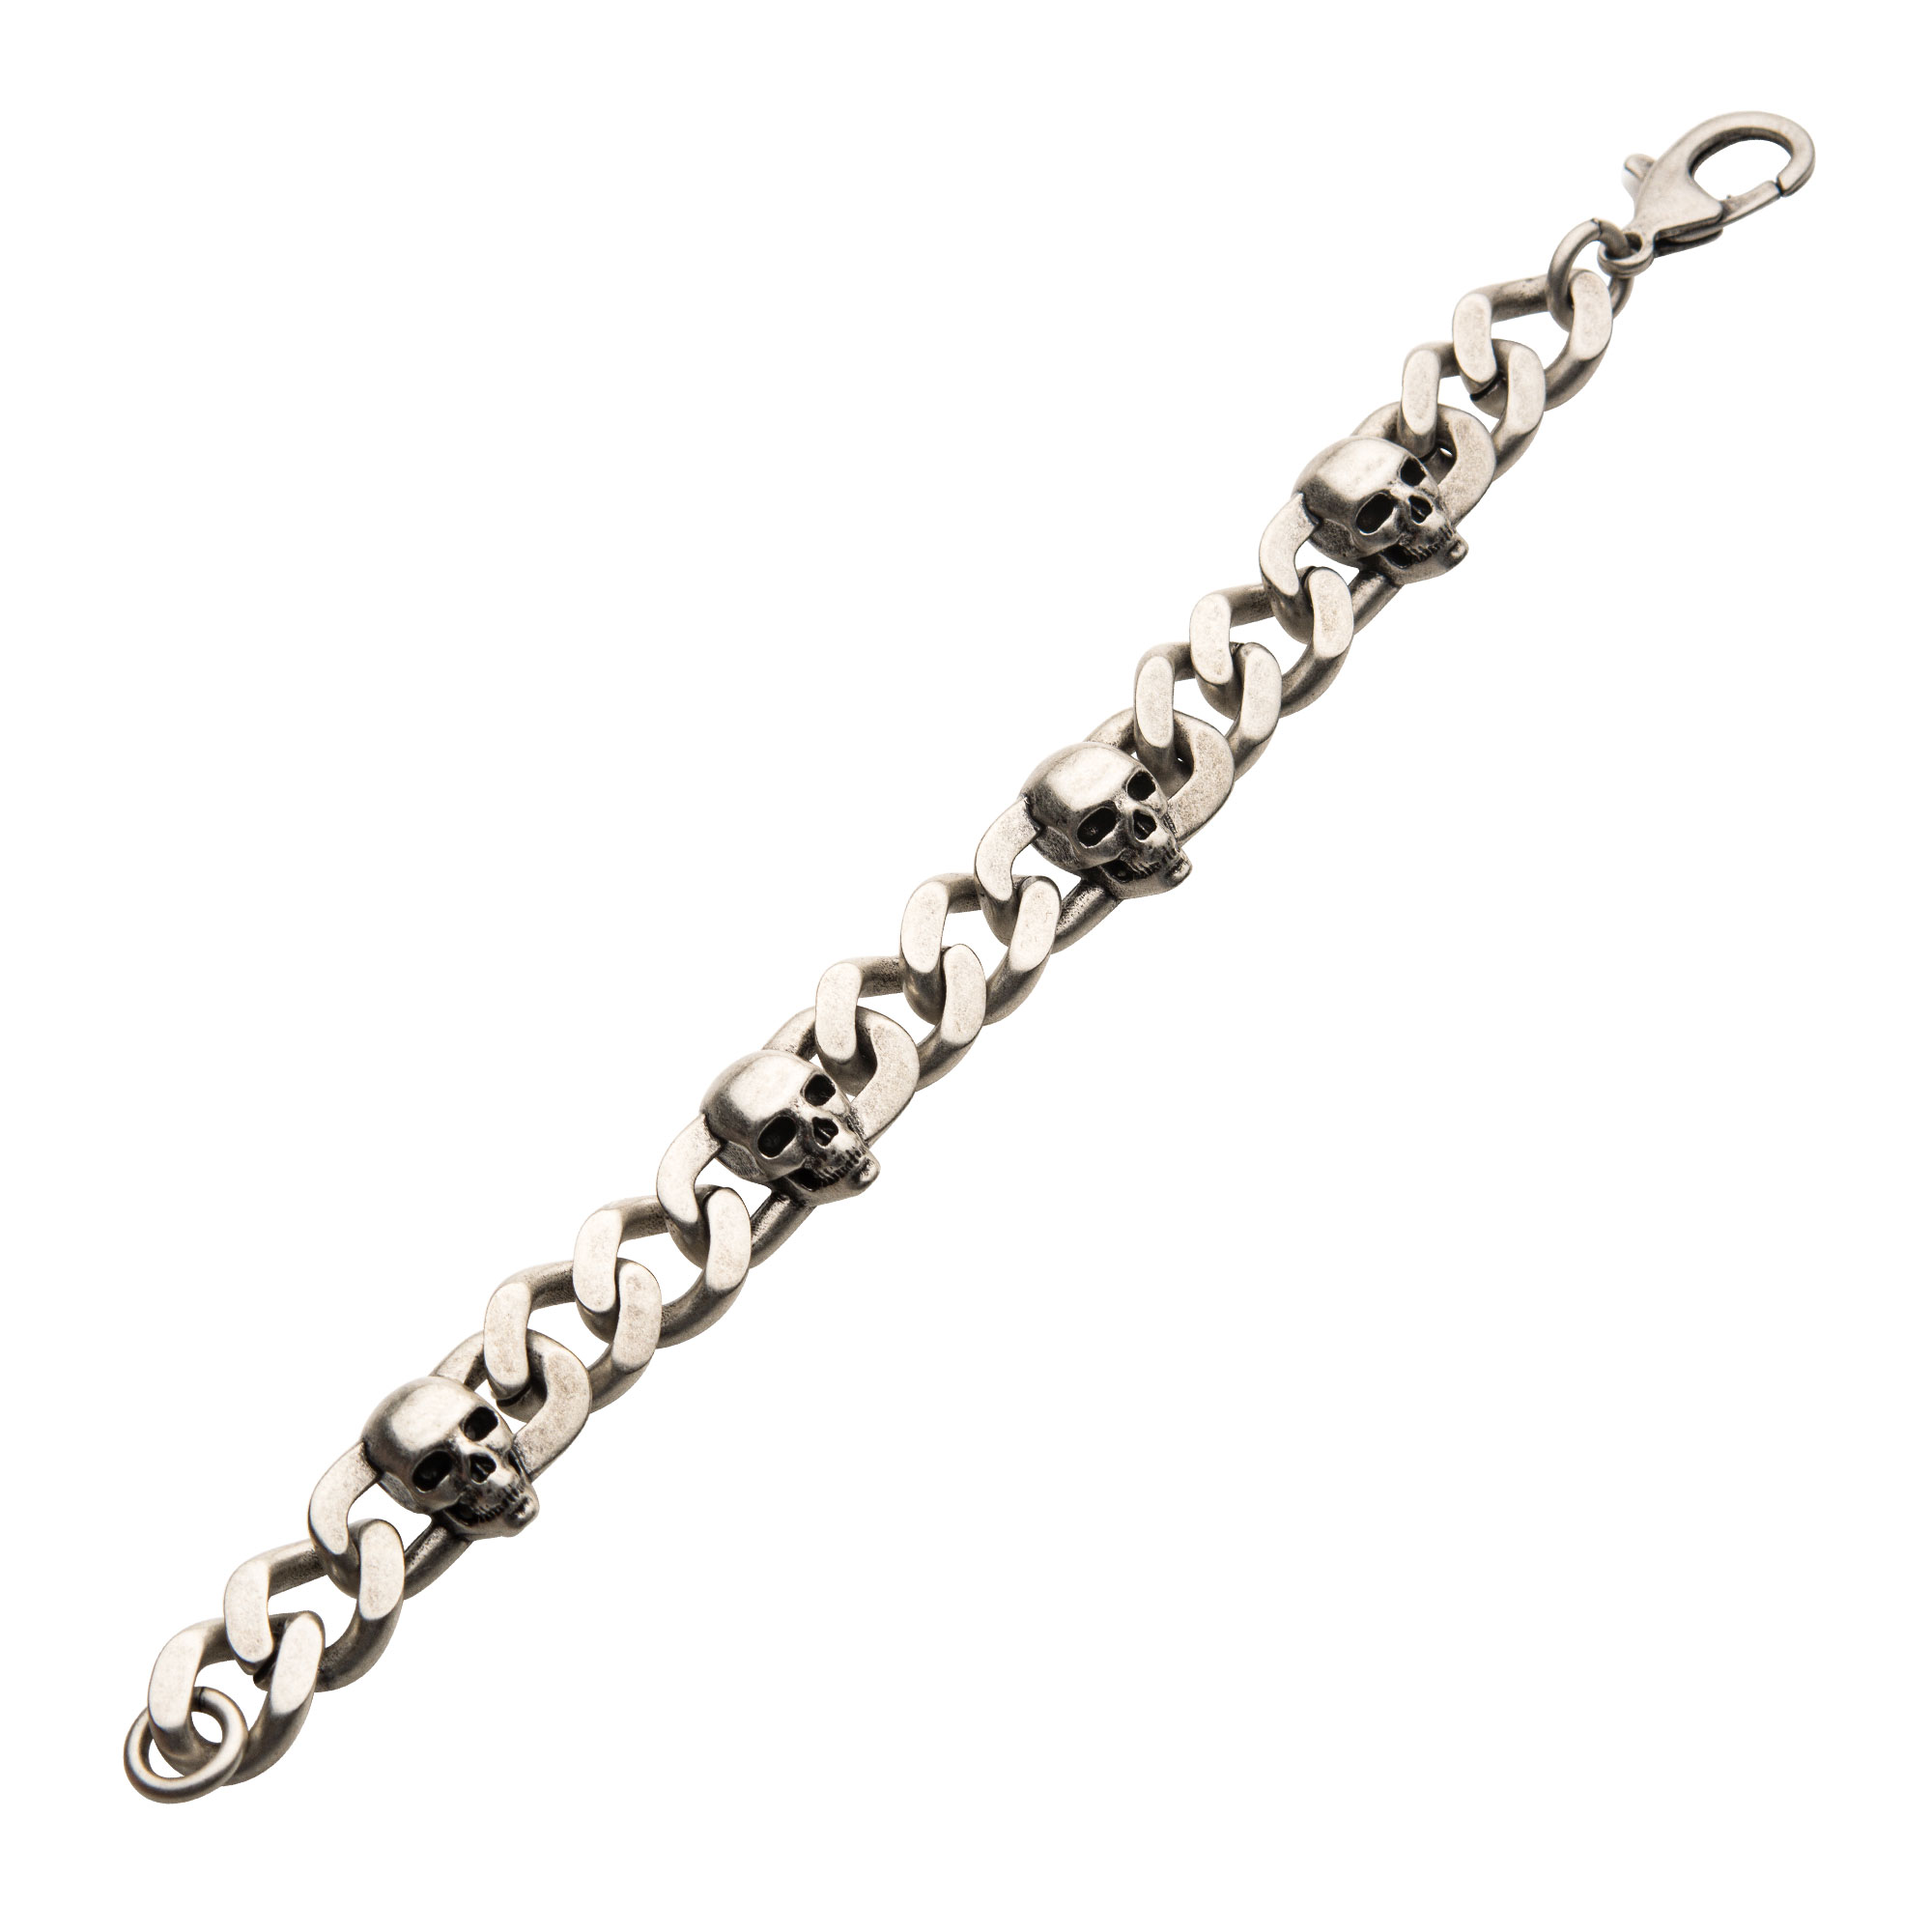 Stainless Steel Silver Plated with Skull Design Chunky Chain Bracelet Image 2 Spath Jewelers Bartow, FL